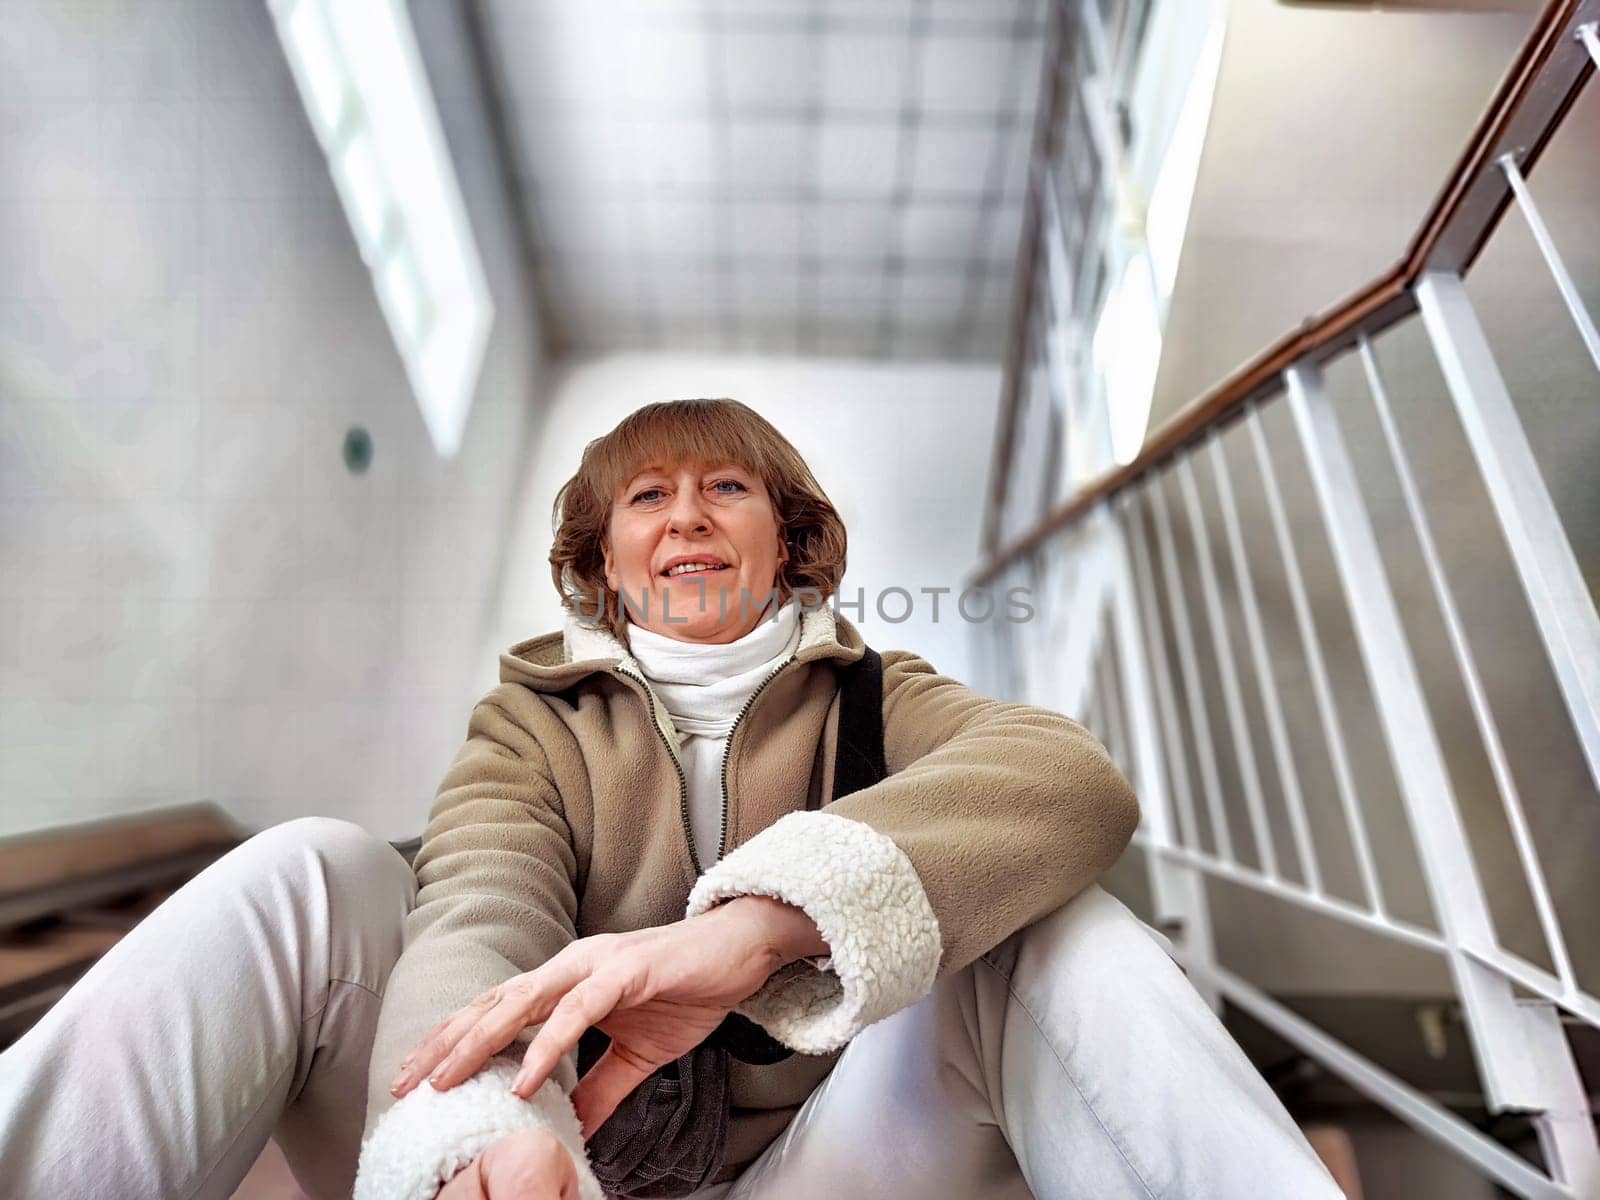 Cute girl on Indoor Staircase. Mature middle aged woman taking selfie indoors